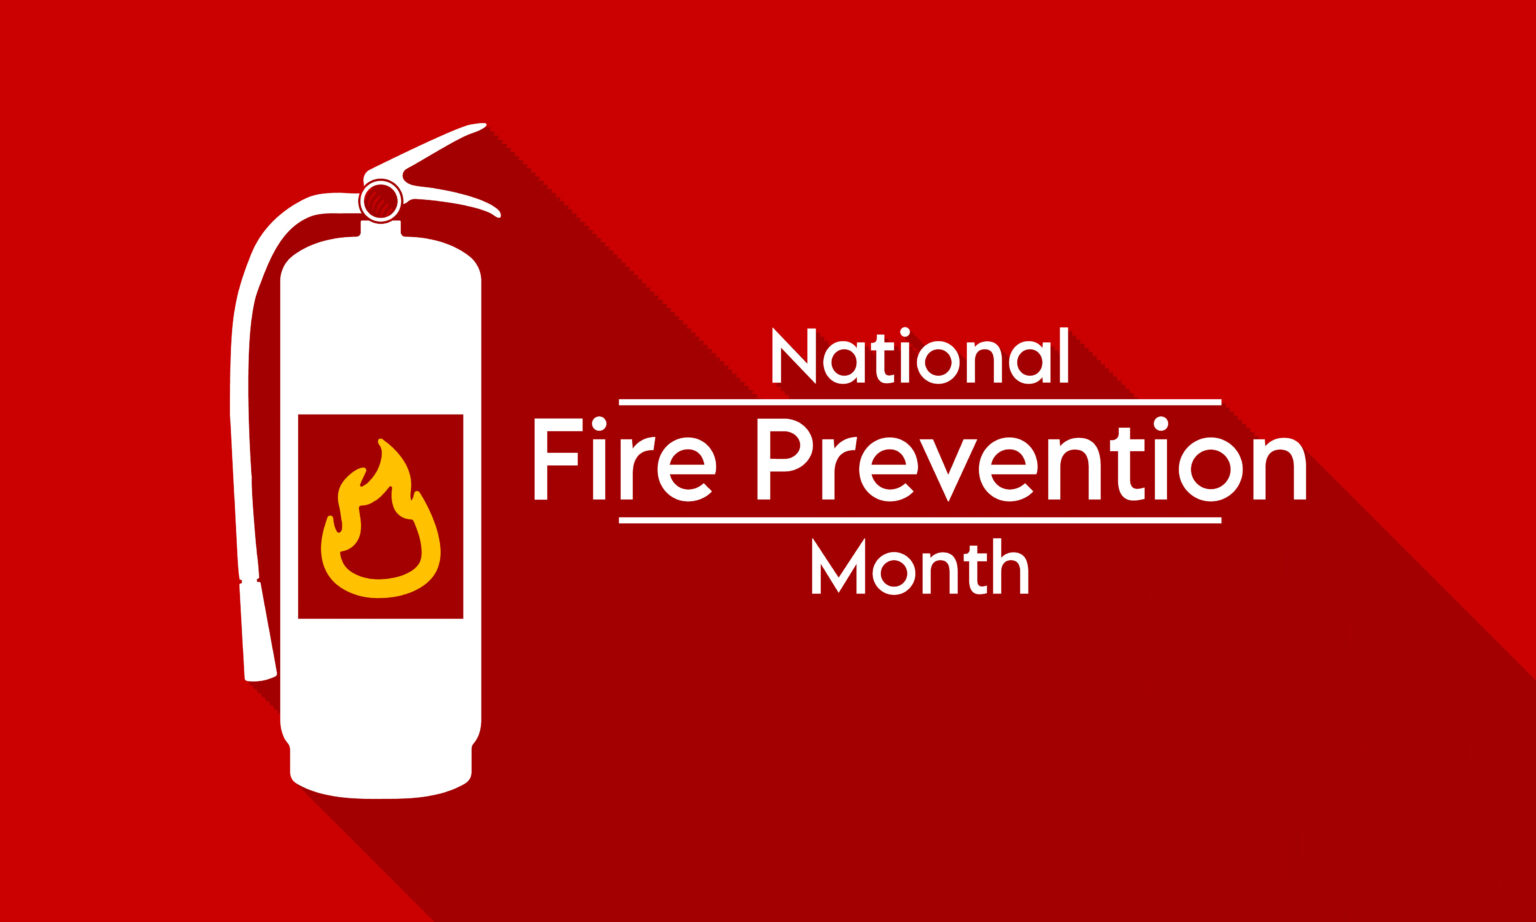 Hospital National Fire Safety Month Resources GloShield